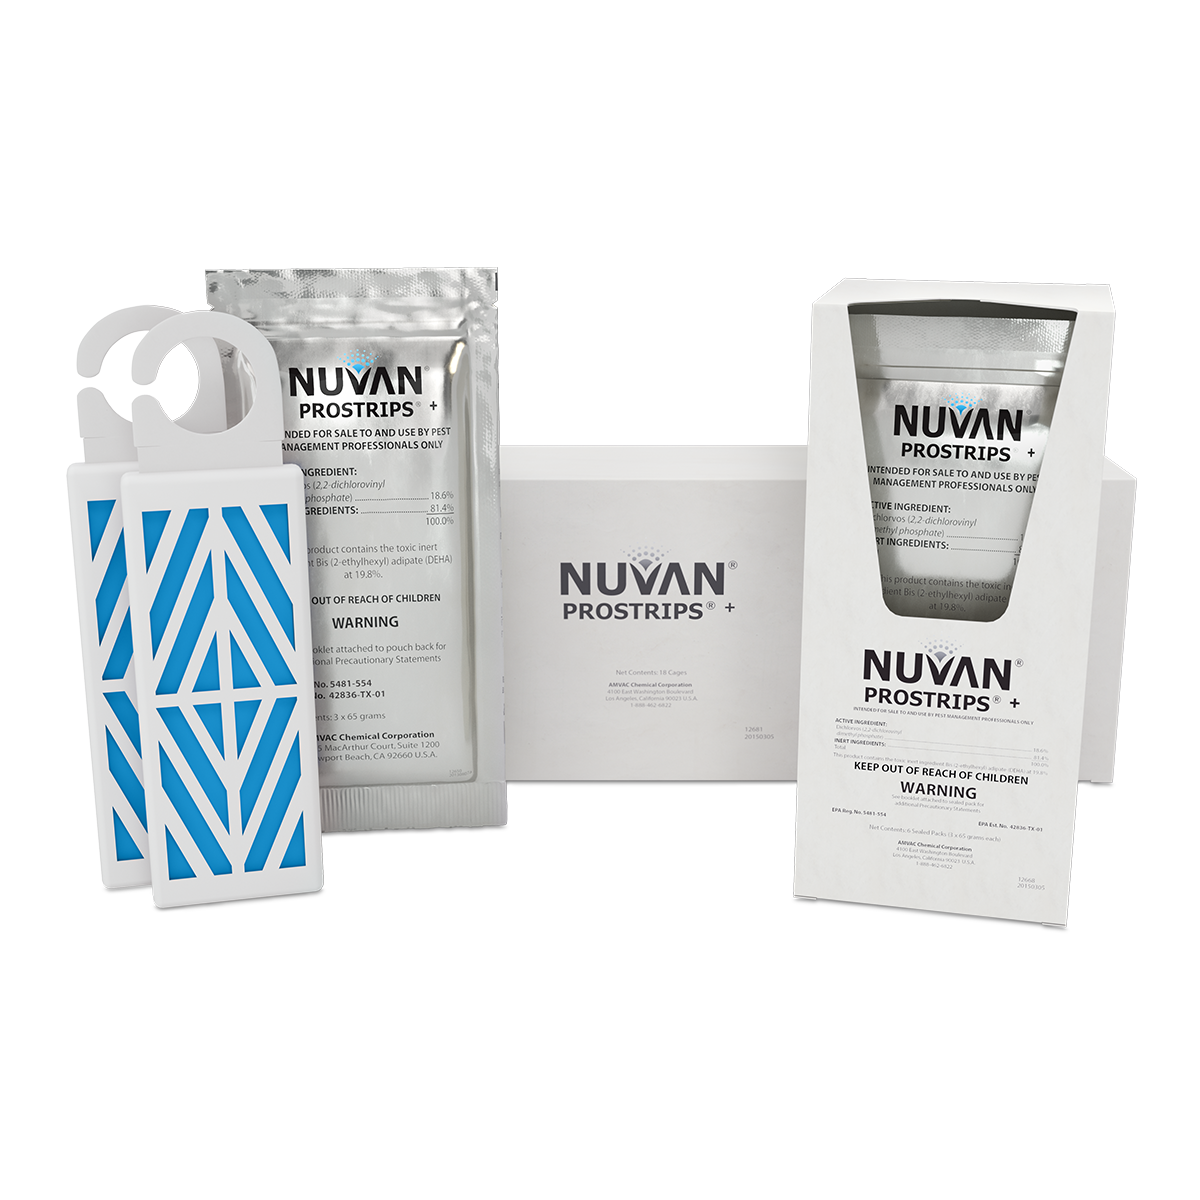 NUVAN® PROSTRIPS®+Product Image